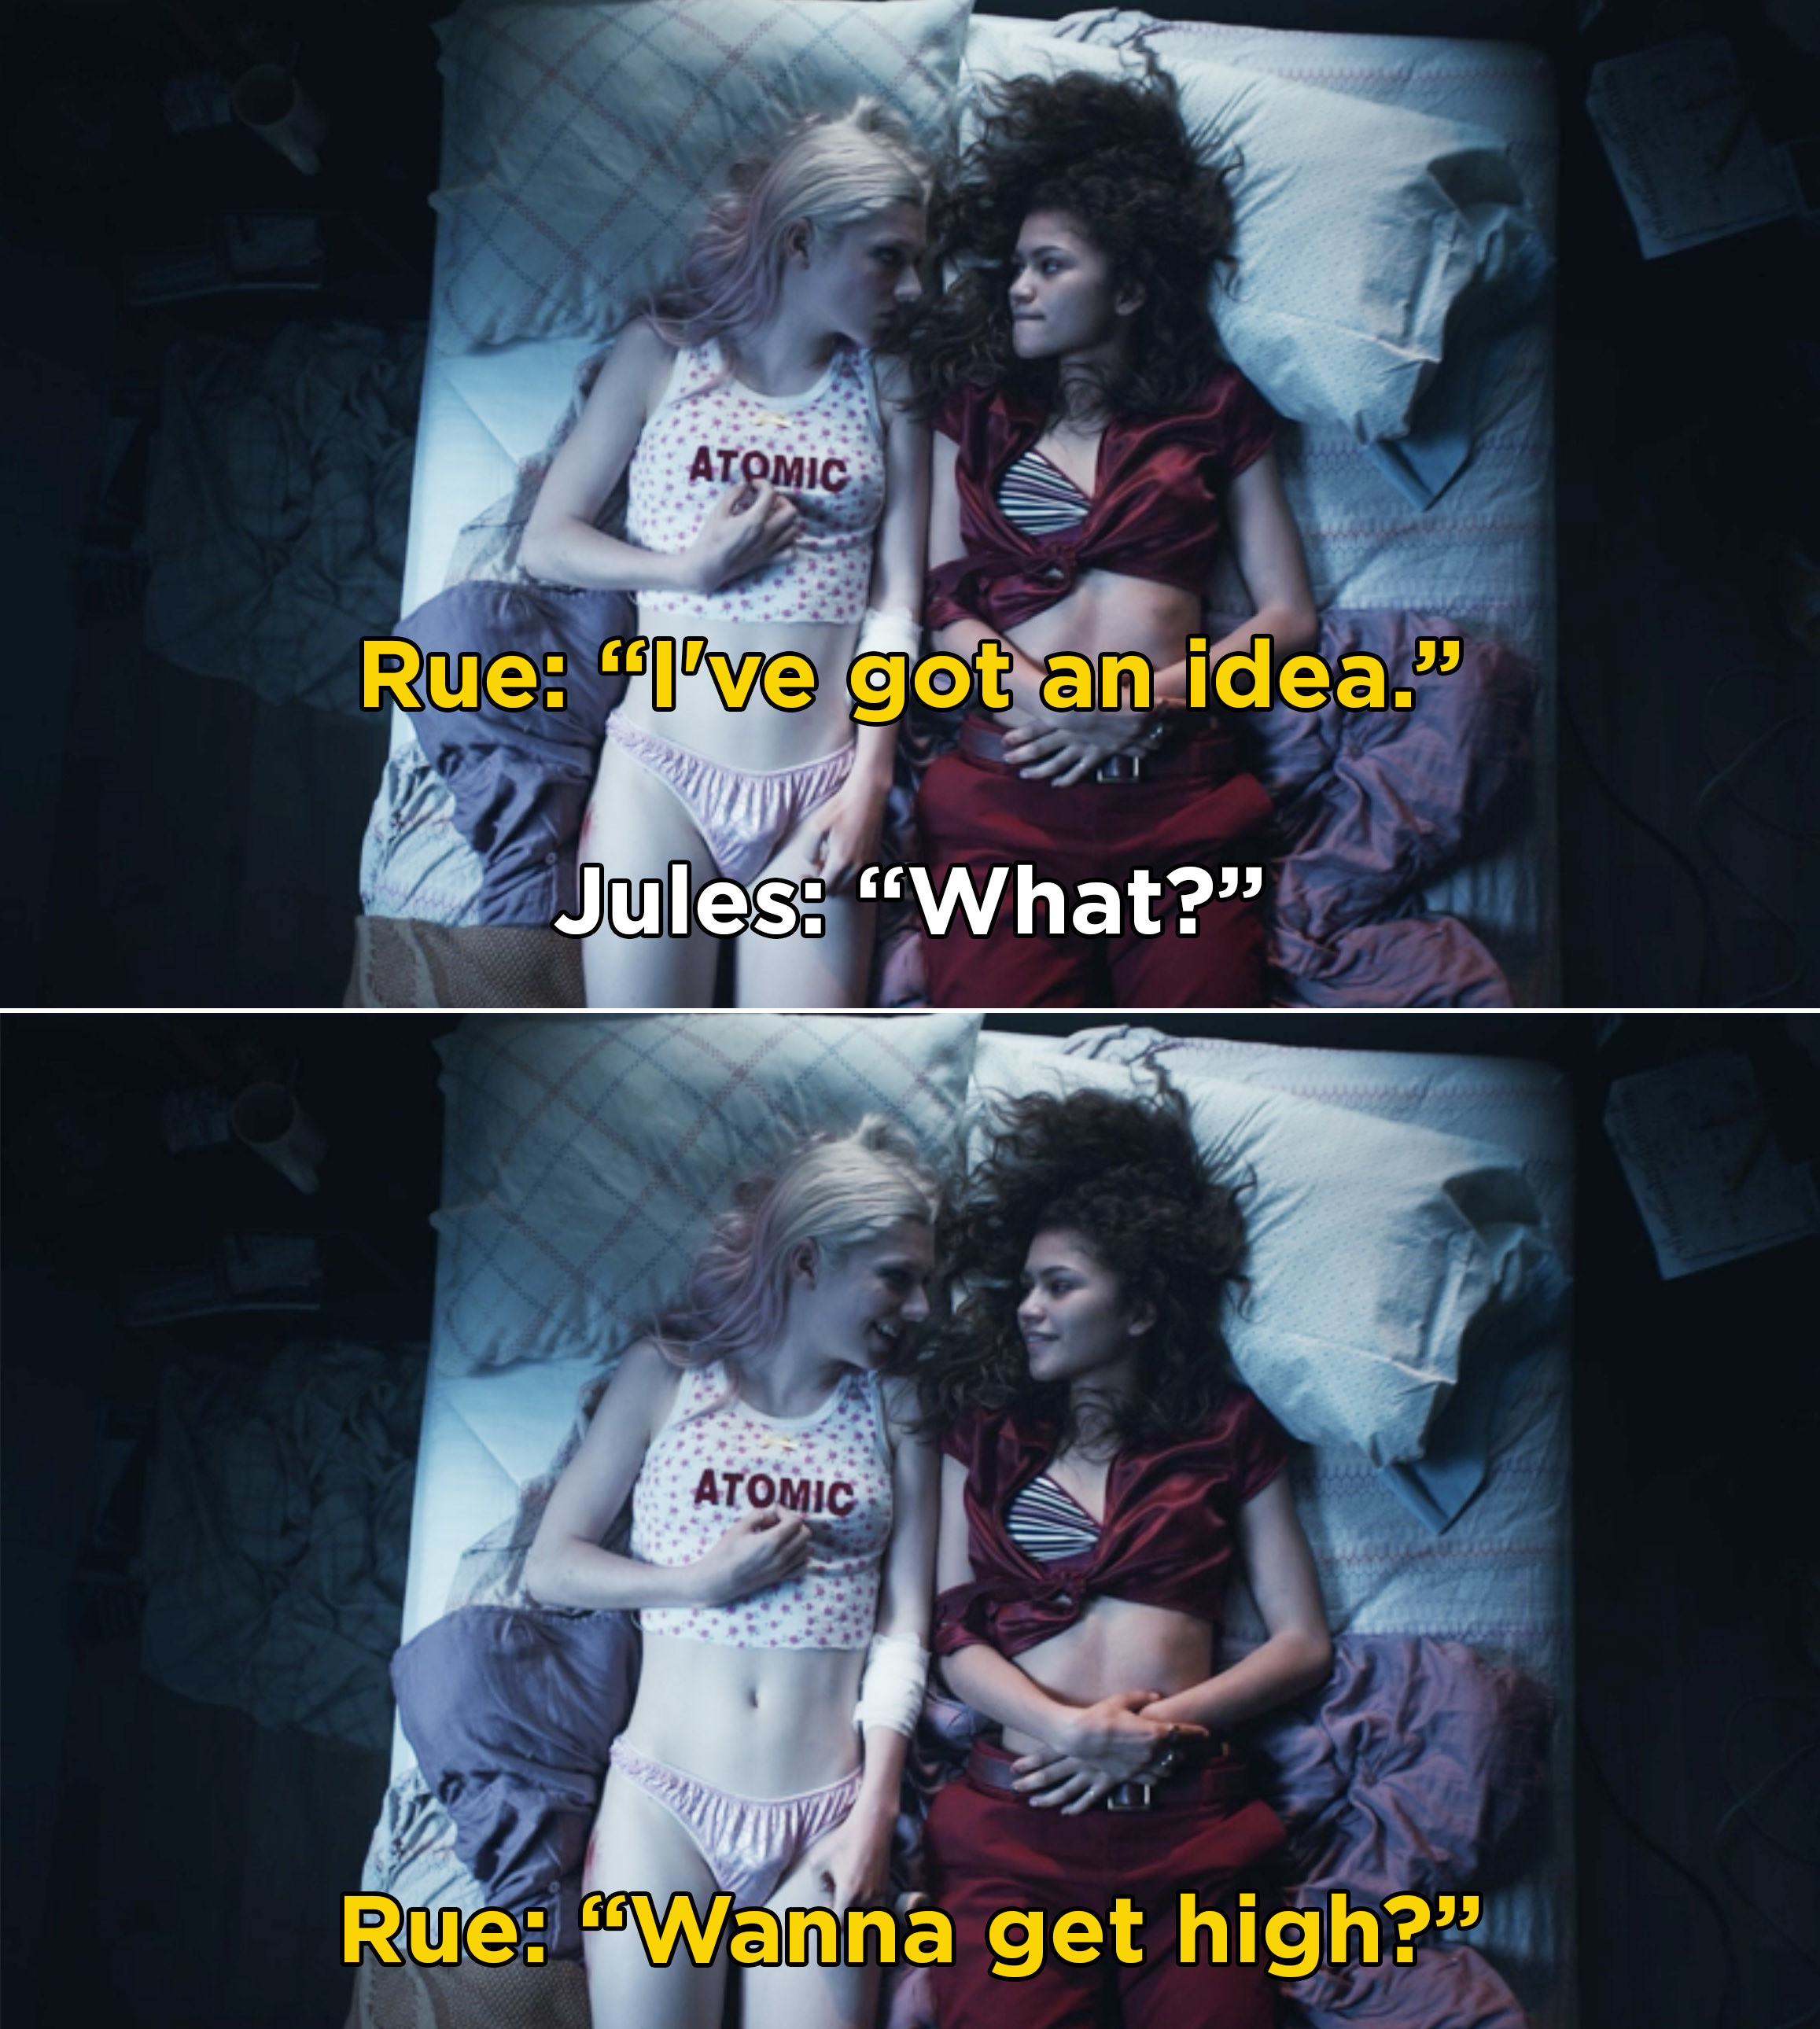 Rue asking Jules if she wants to get high